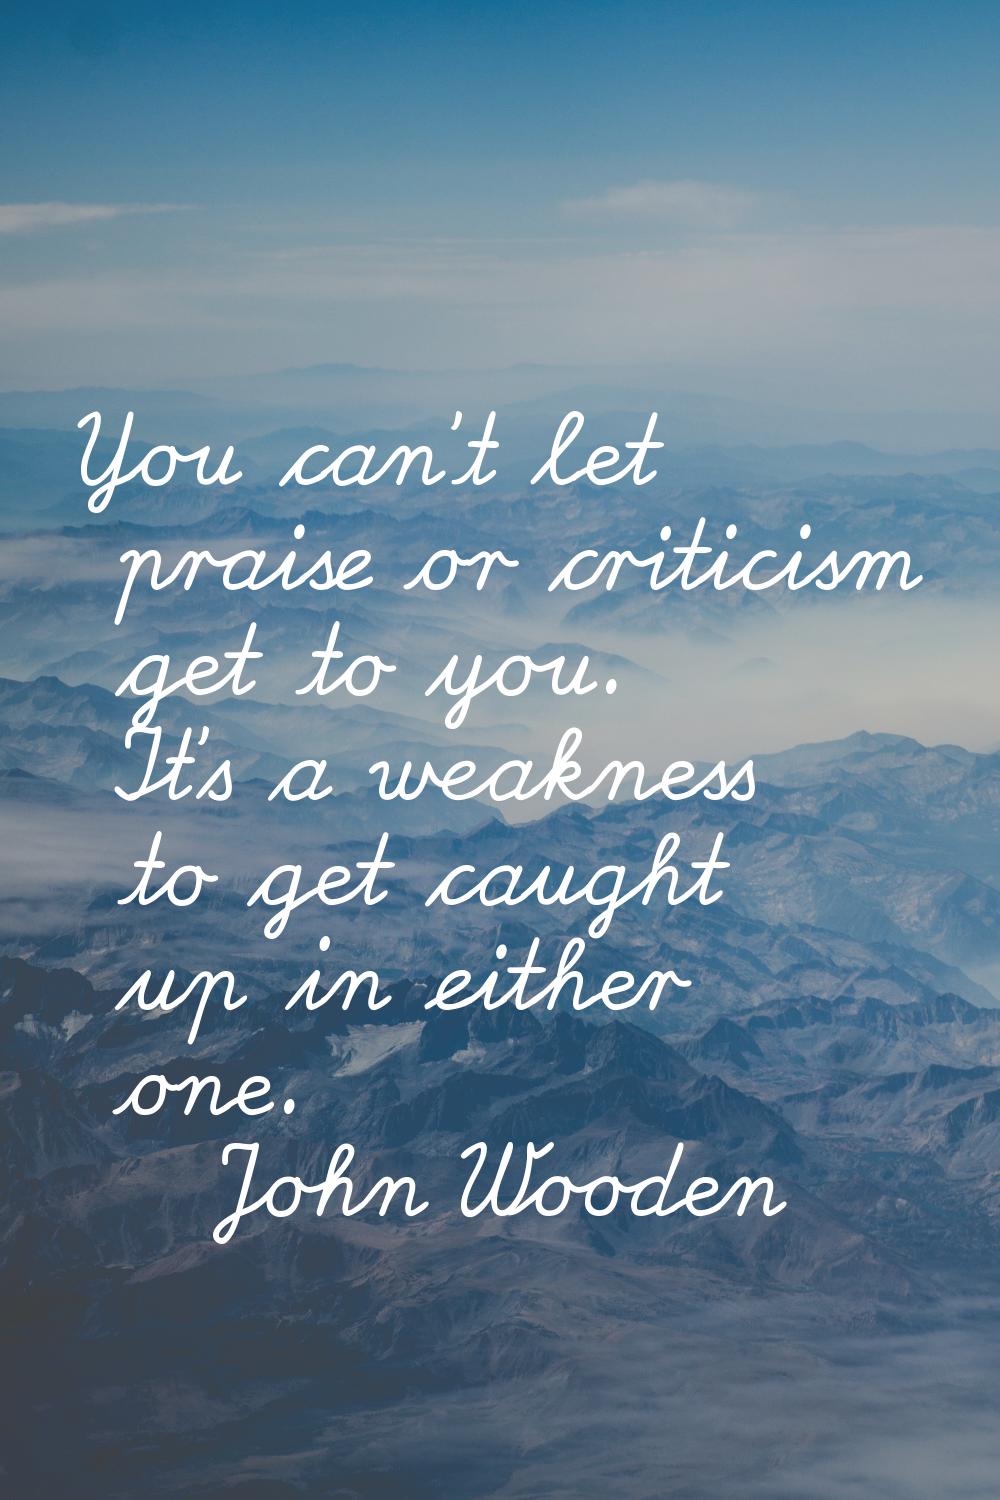 You can't let praise or criticism get to you. It's a weakness to get caught up in either one.